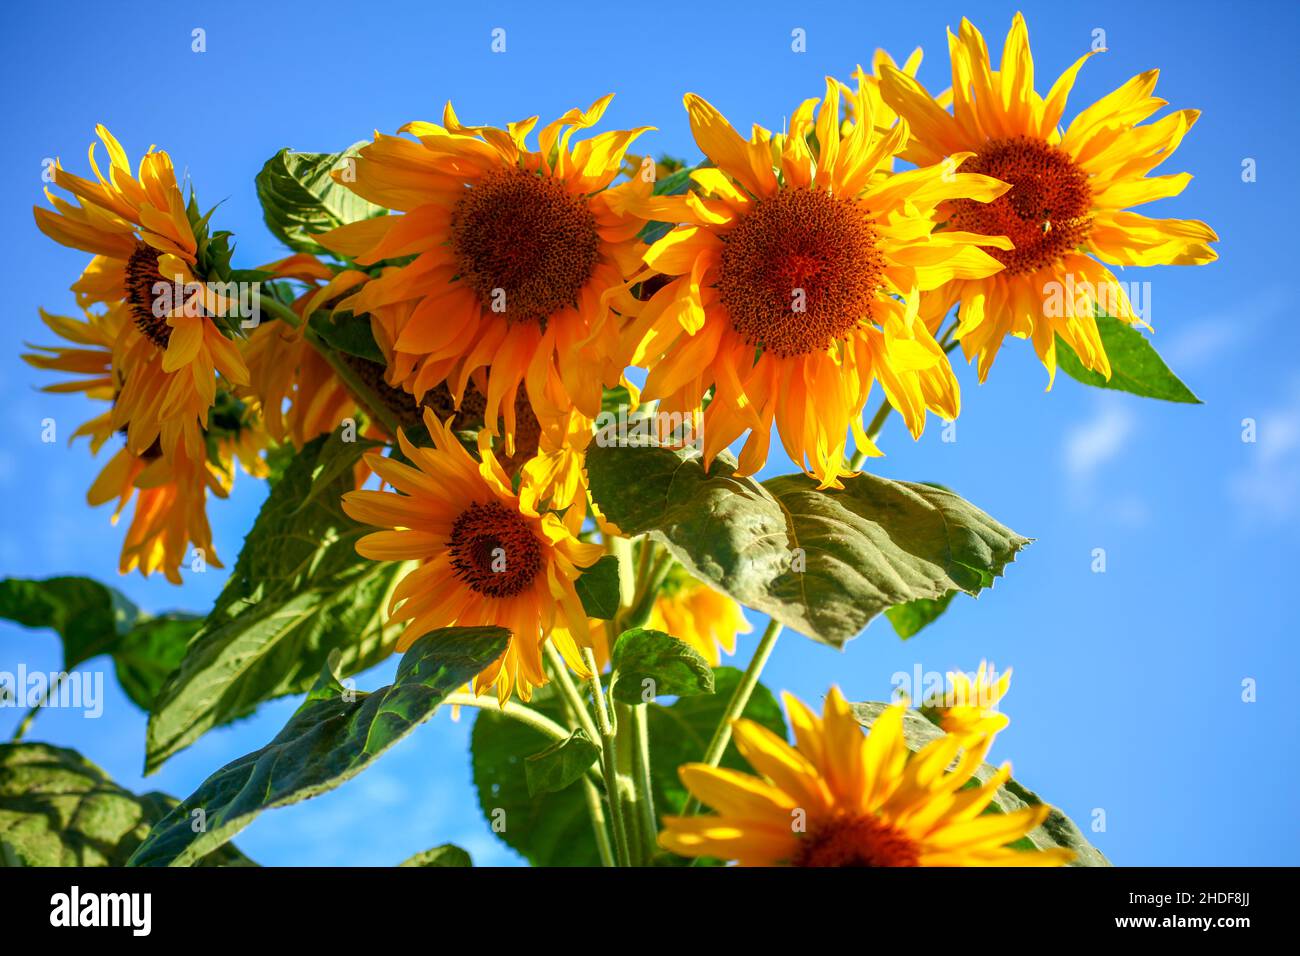 Blooming sunflowers in a field Photographed in Israel in May Stock Photo